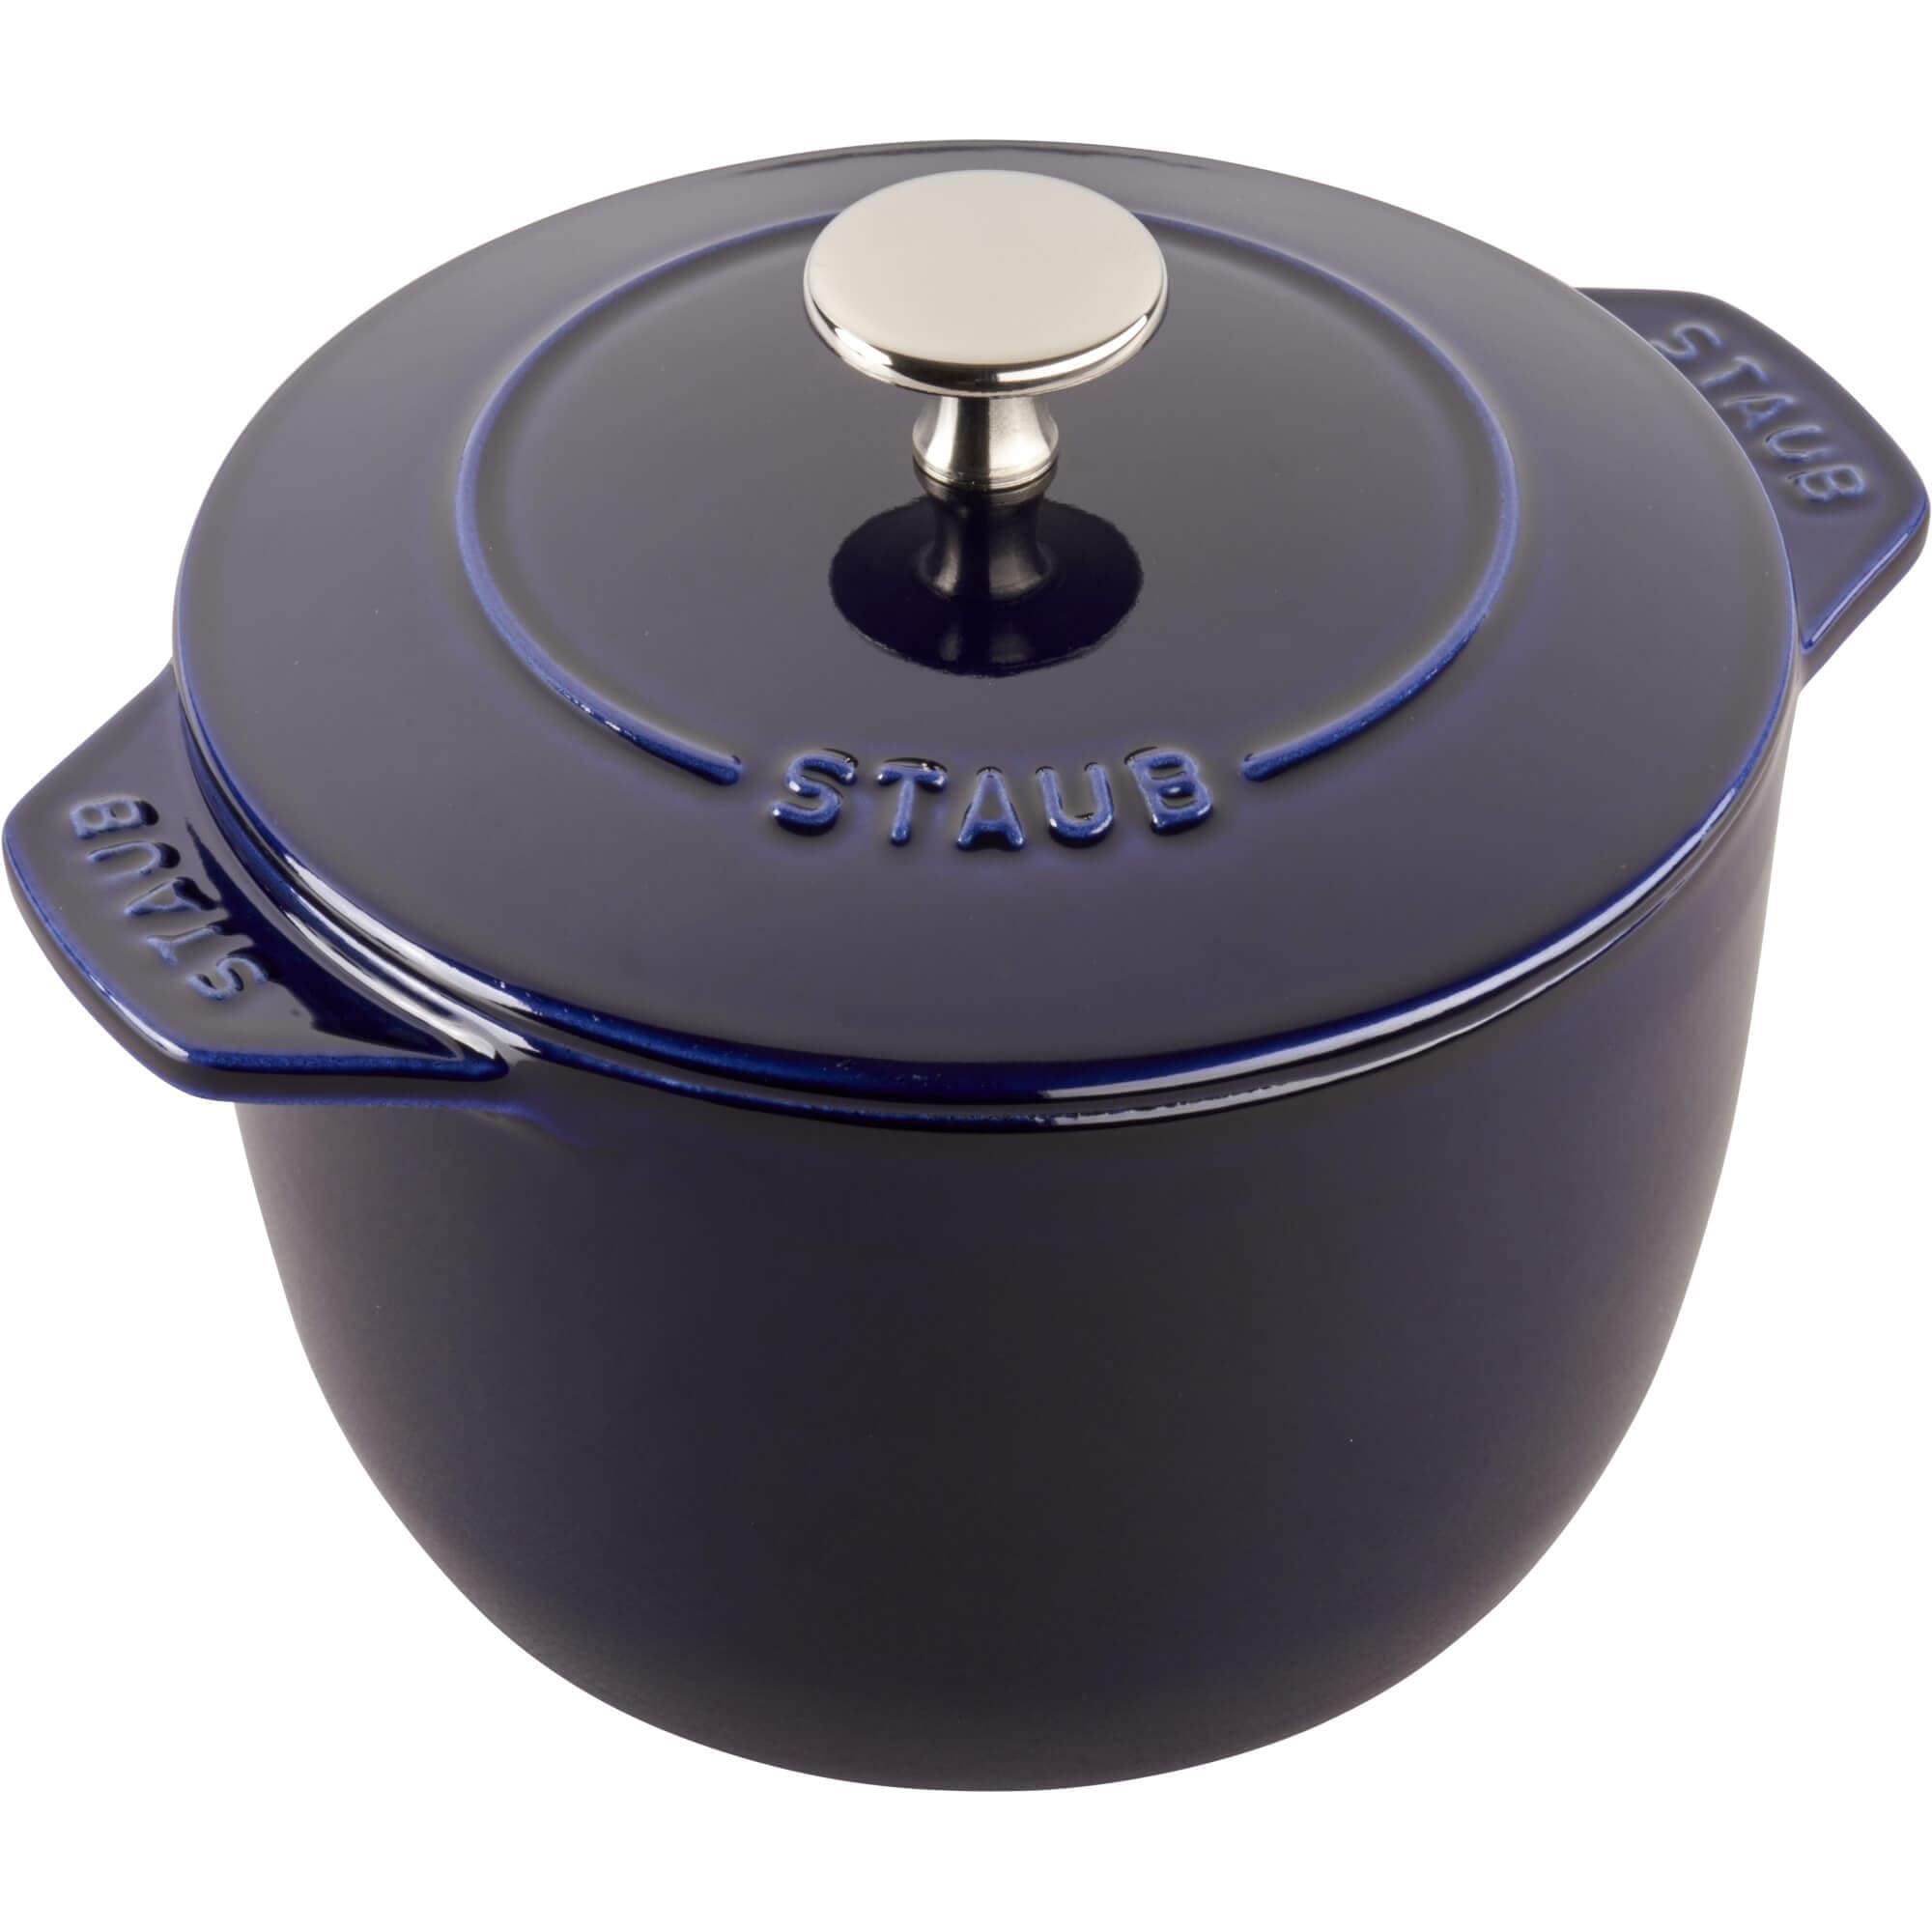 STAUB Cast Iron 1.5-qt Petite French Oven - Bed Bath & Beyond - 16743355